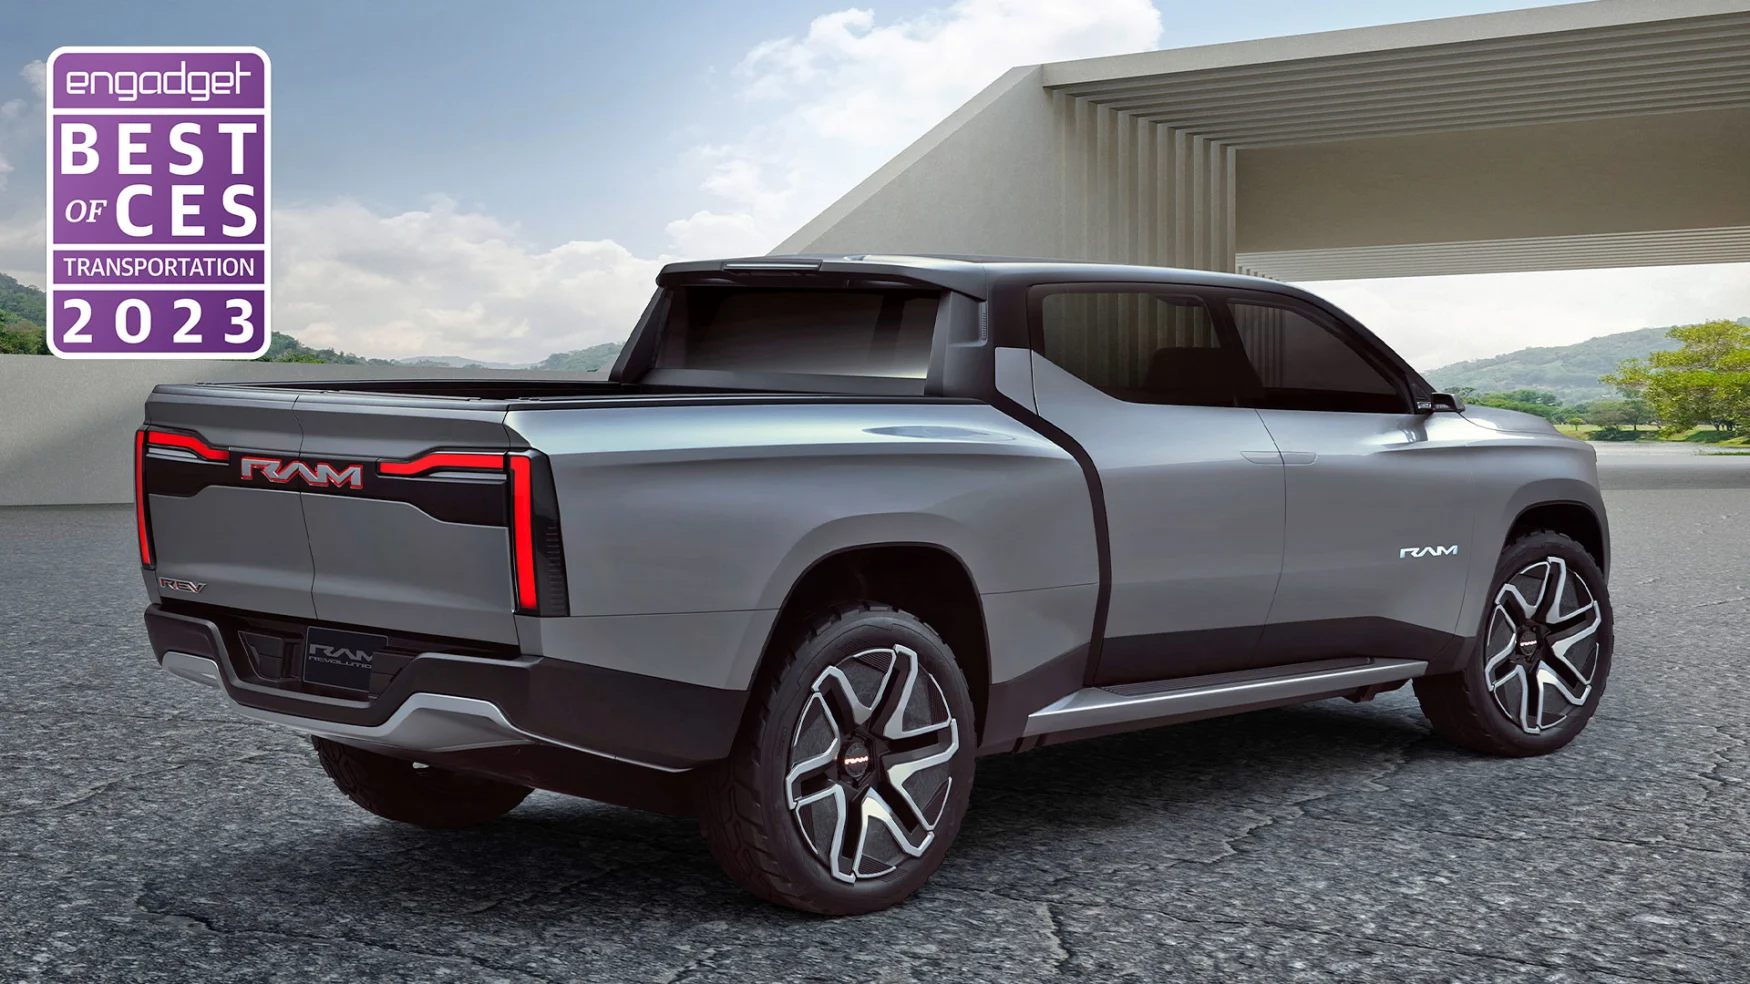 A rendering of a grey Stellantis Ram 1500 BEV Concept is seen parked on a roadway.